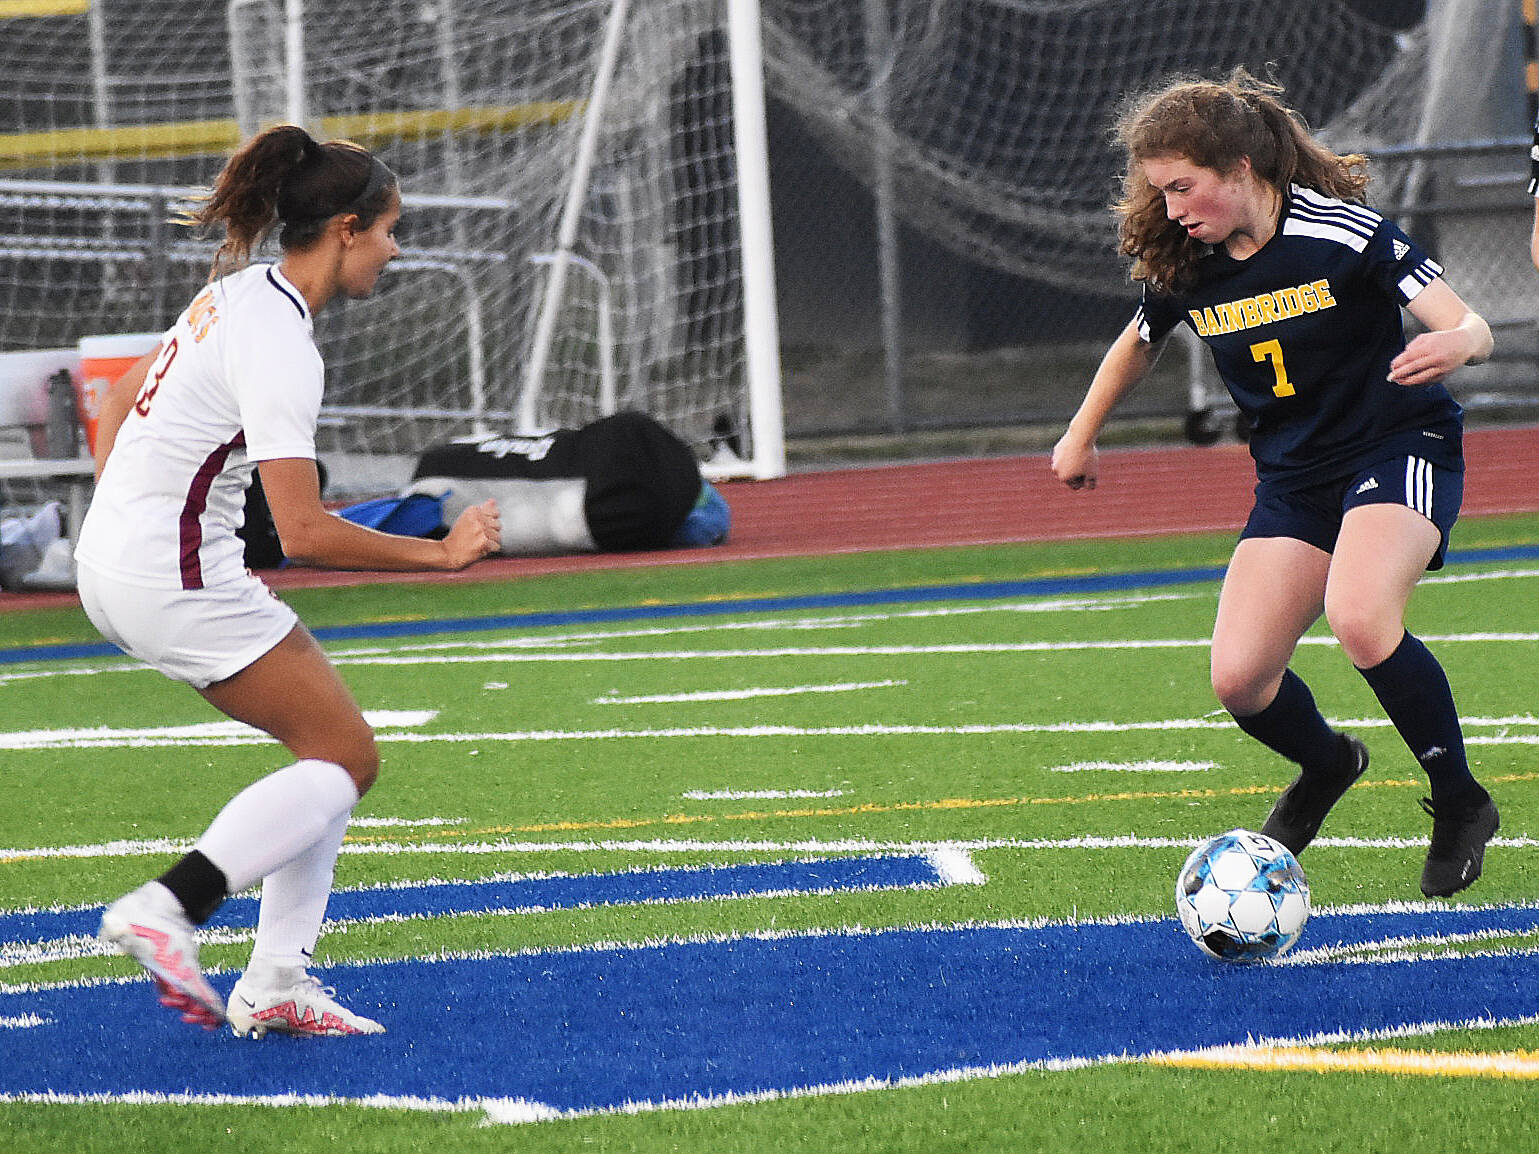 Spartan Gabby Weis challenges Buc Kate Collins for the ball.